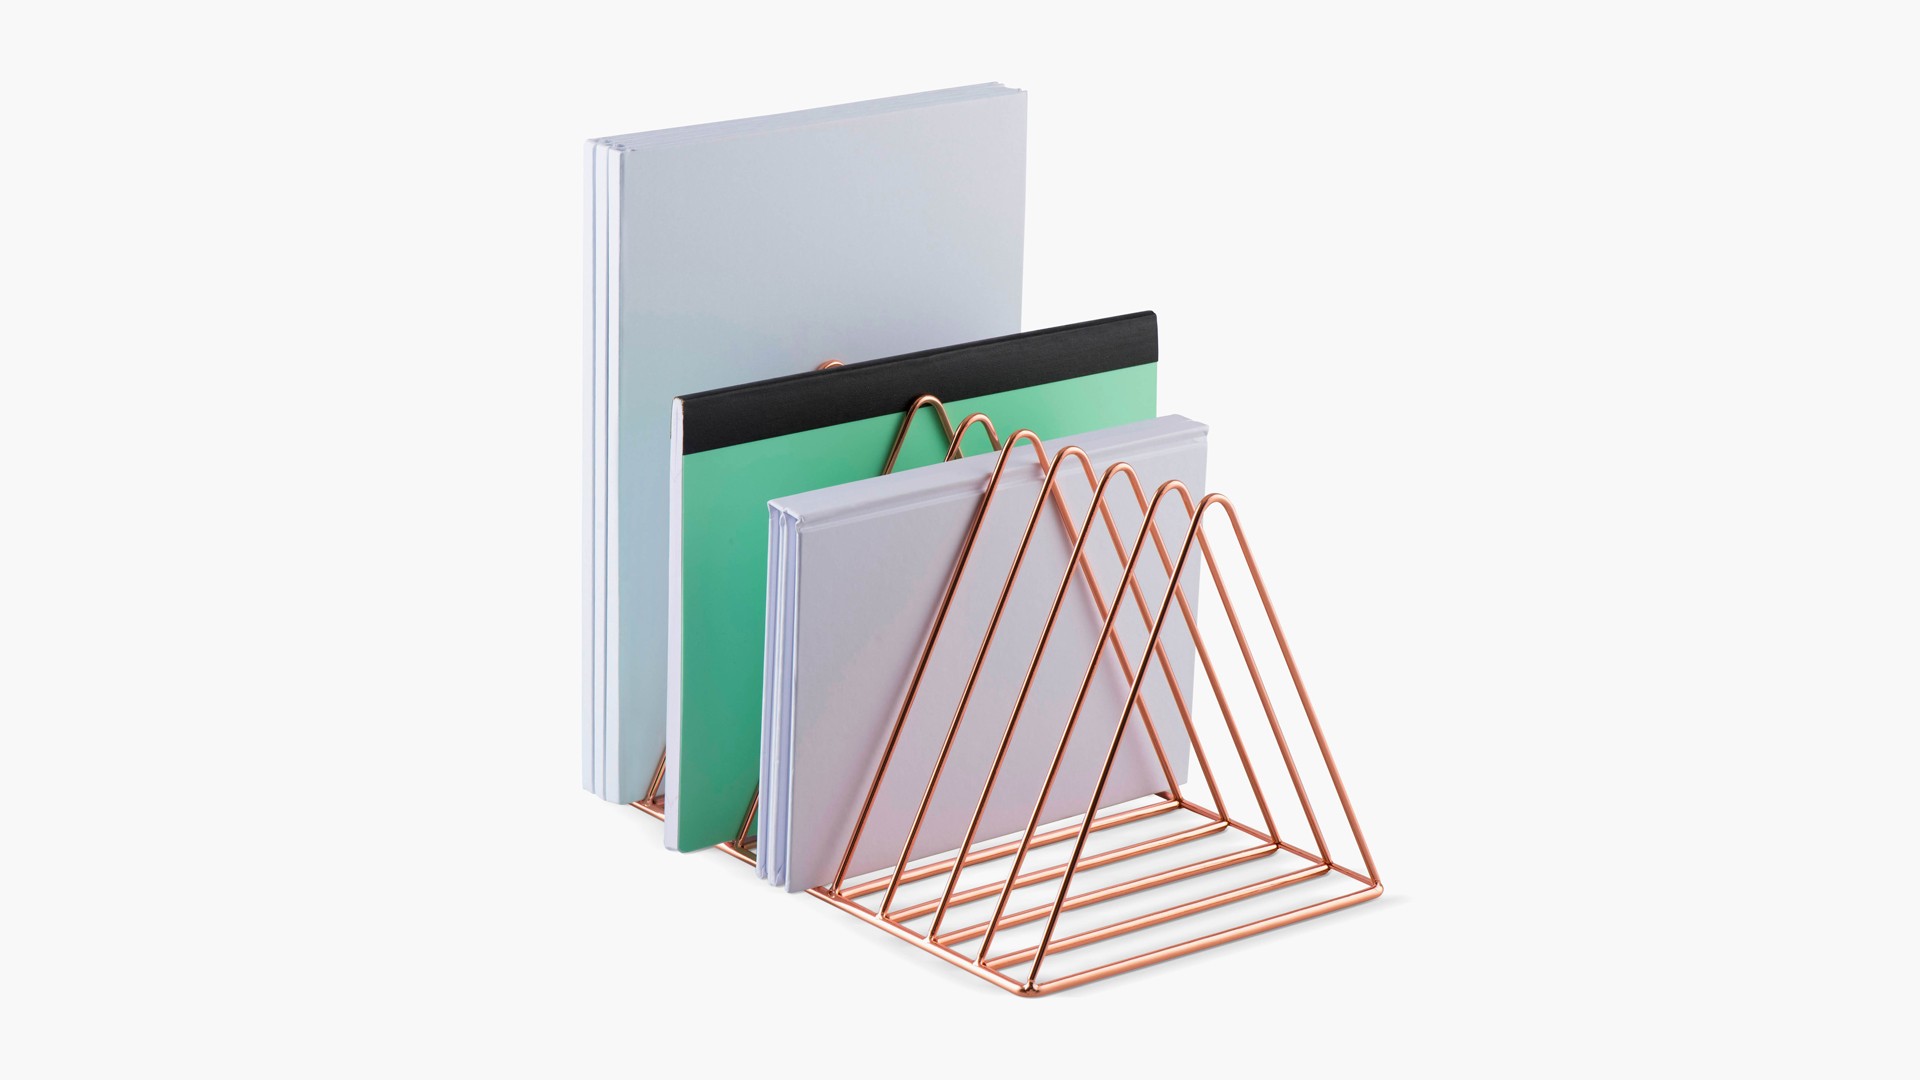 Gold Triangle File Holder